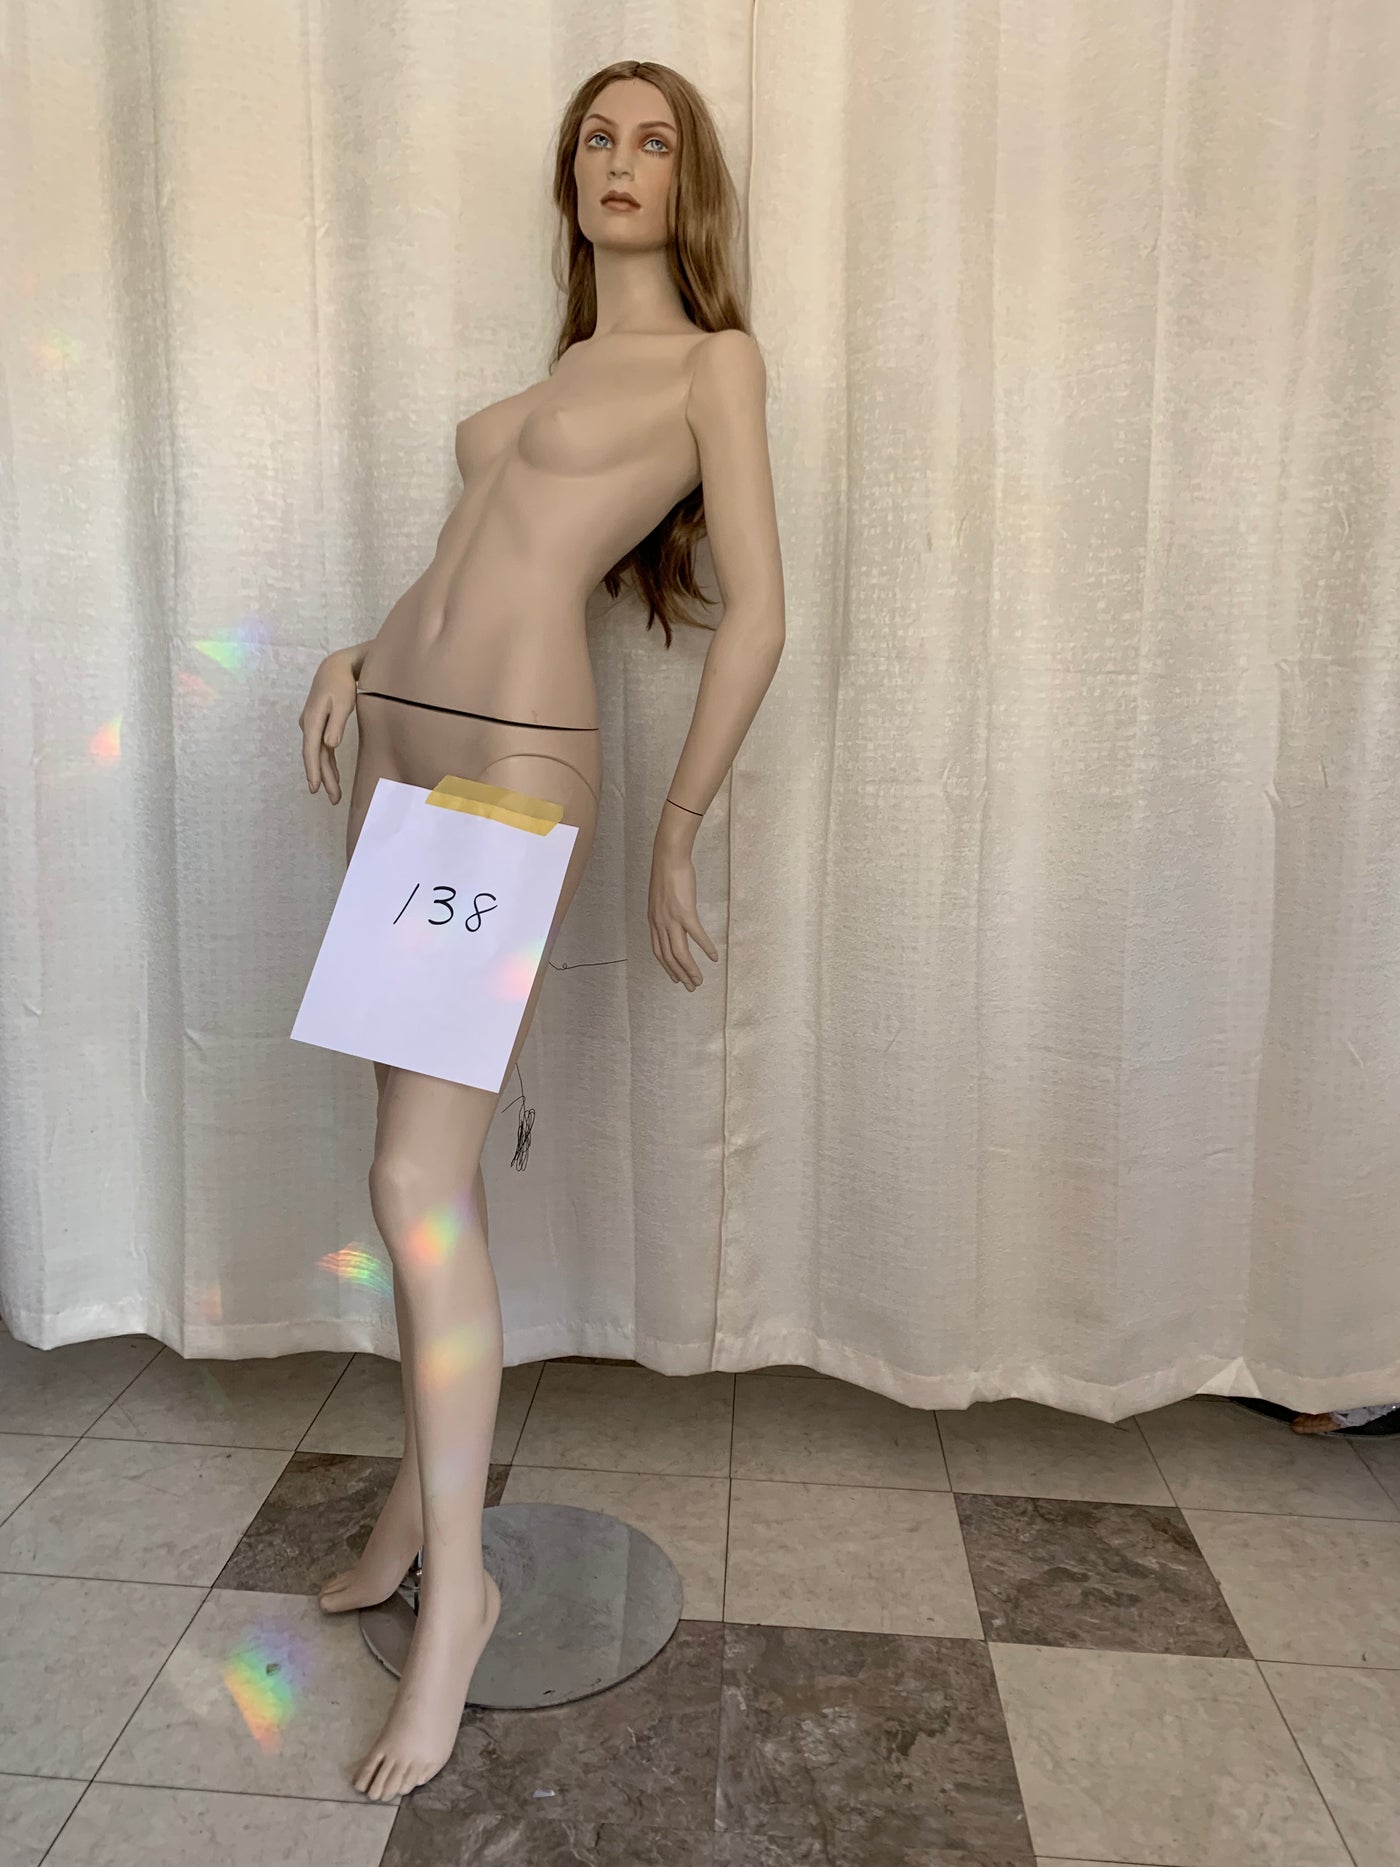 Used Female Adel Rootstein Mannequin #138-  Eimi and Anna Series w/ Blonde Wig